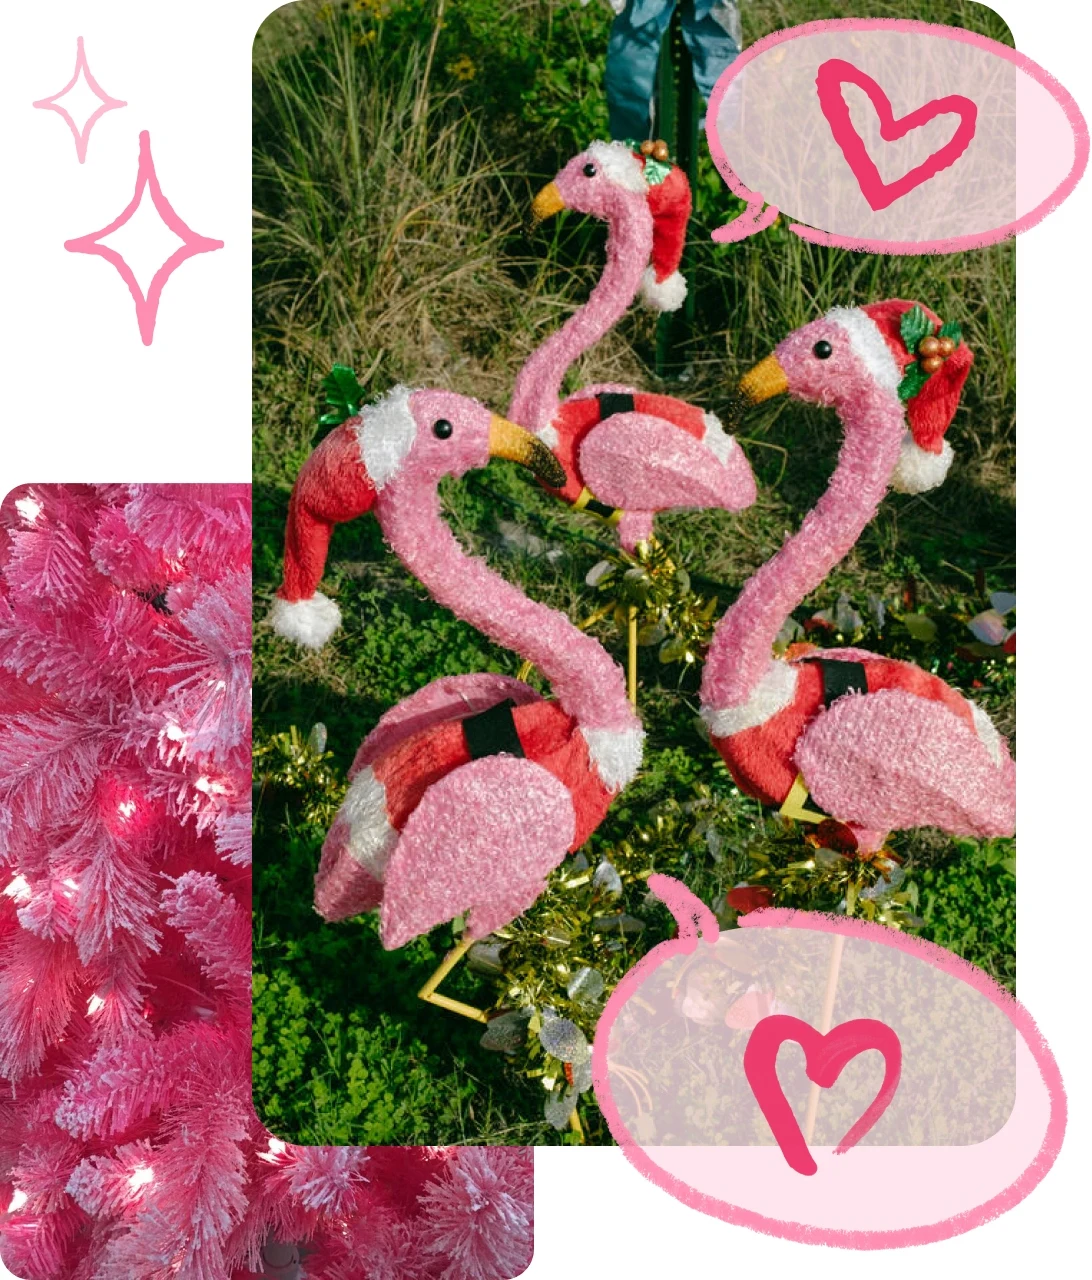 Pin collage of decorative pink flamingo lawn ornaments wearing santa hats, with speech bubble illustrations